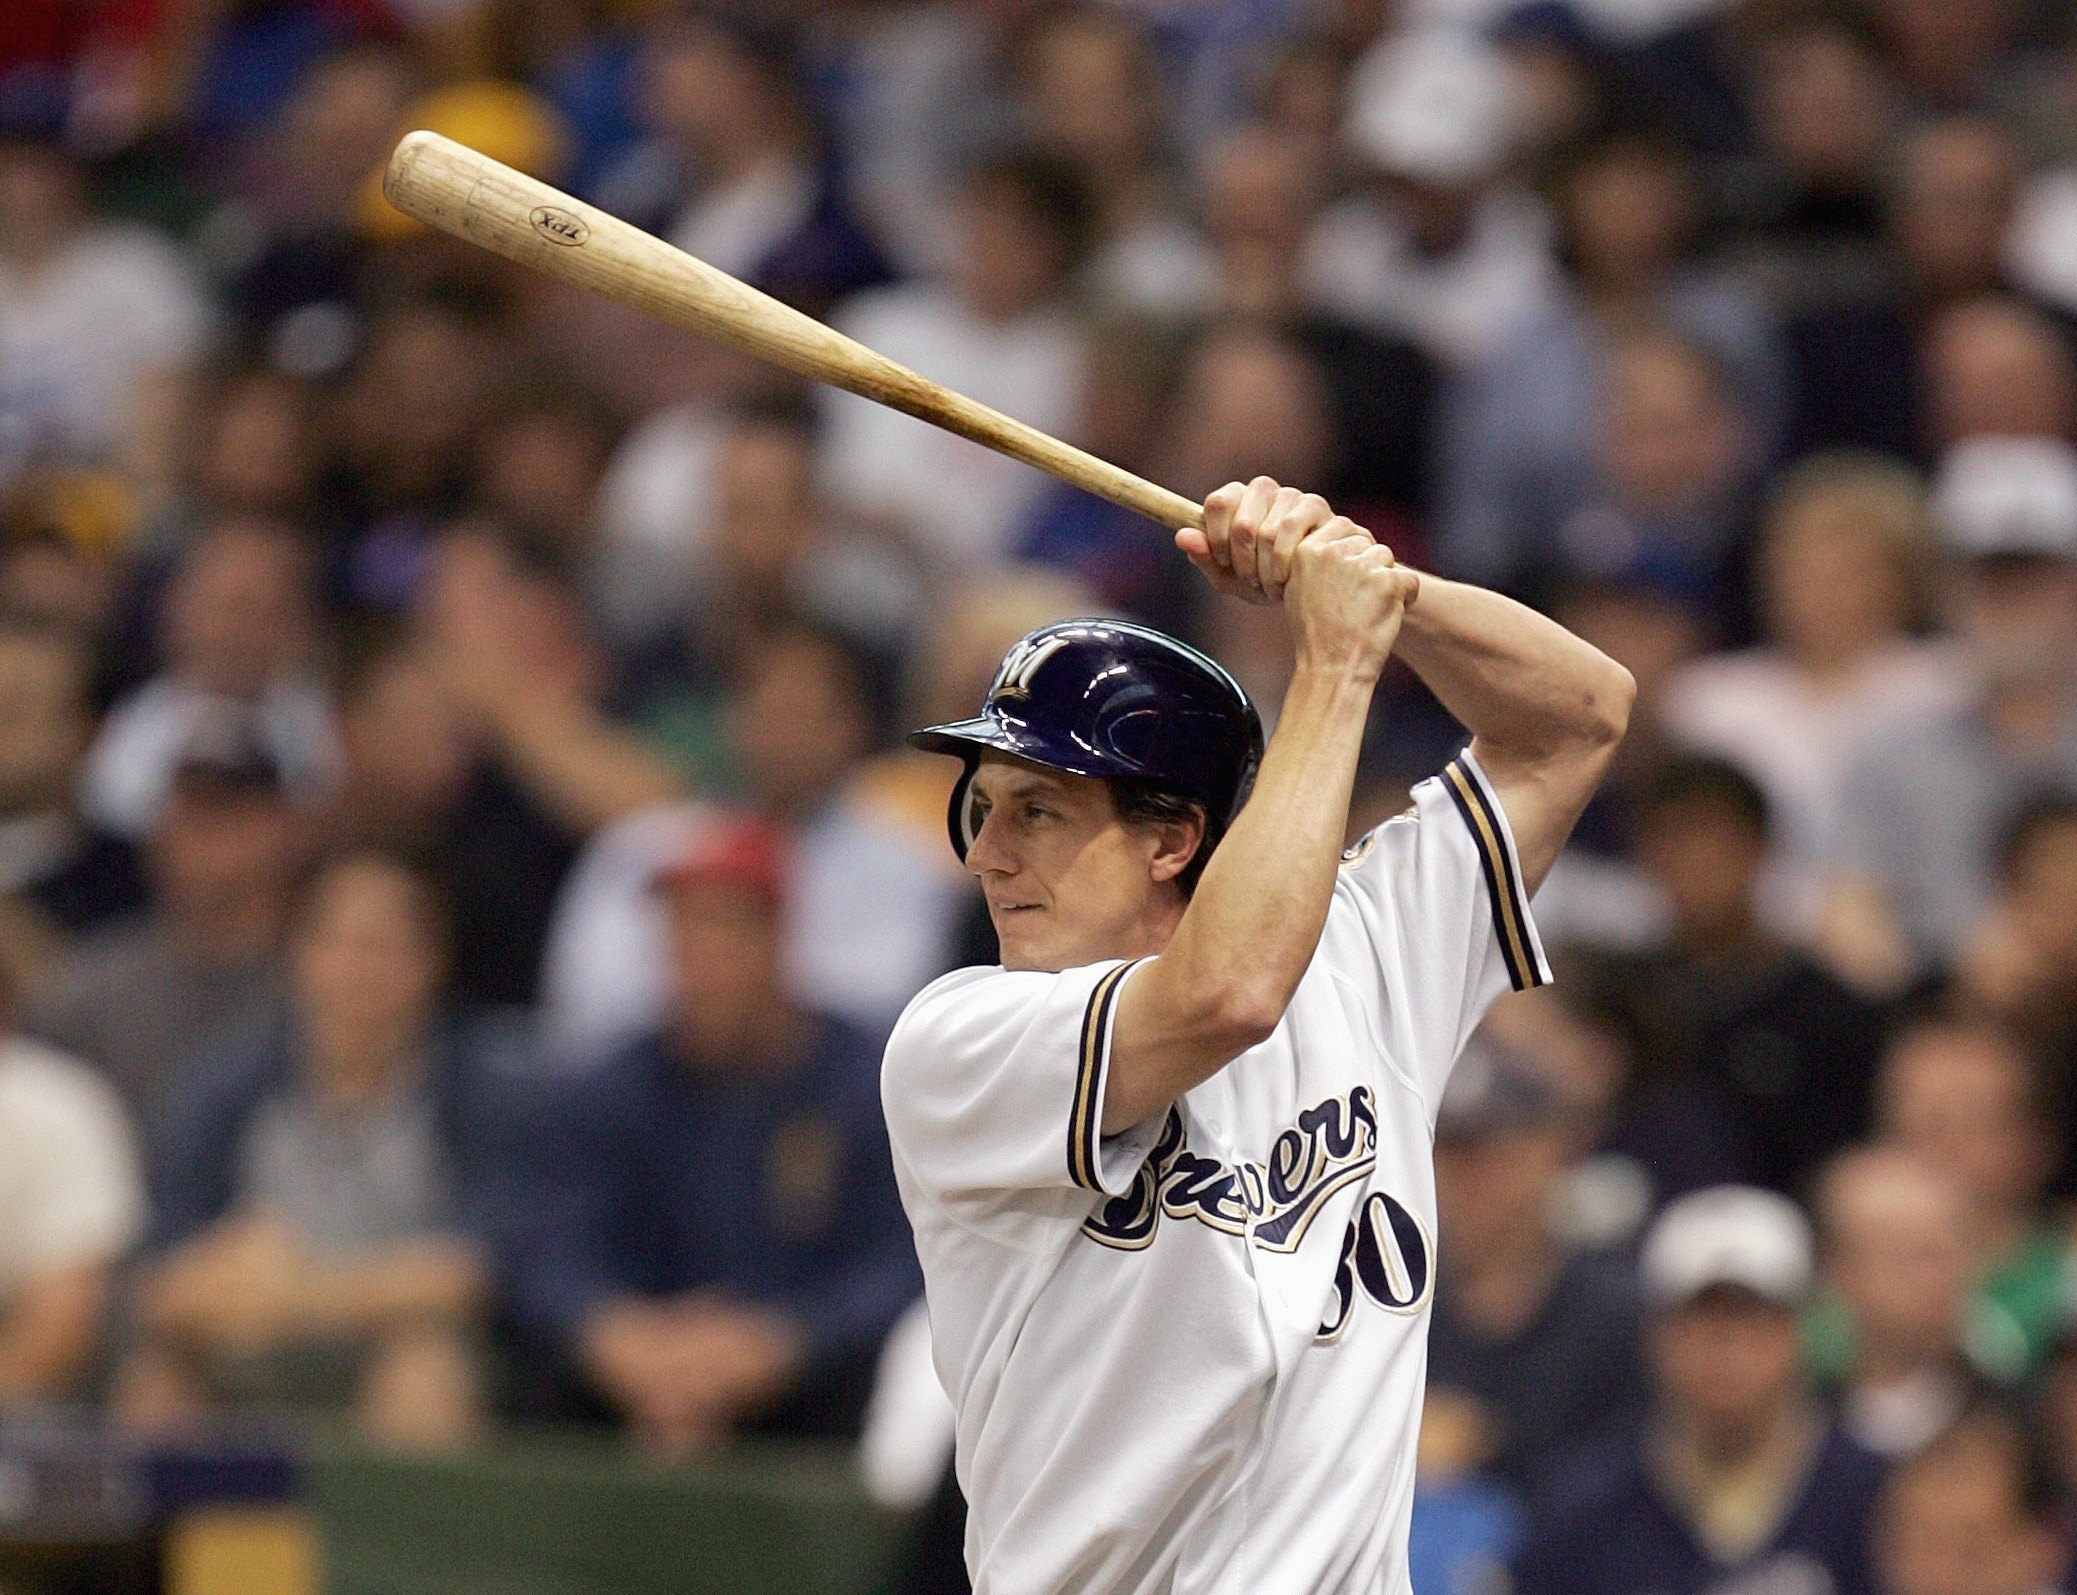 Craig Counsell, Kevin Youkilis and baseball's oddest batting stances -  Sports Illustrated